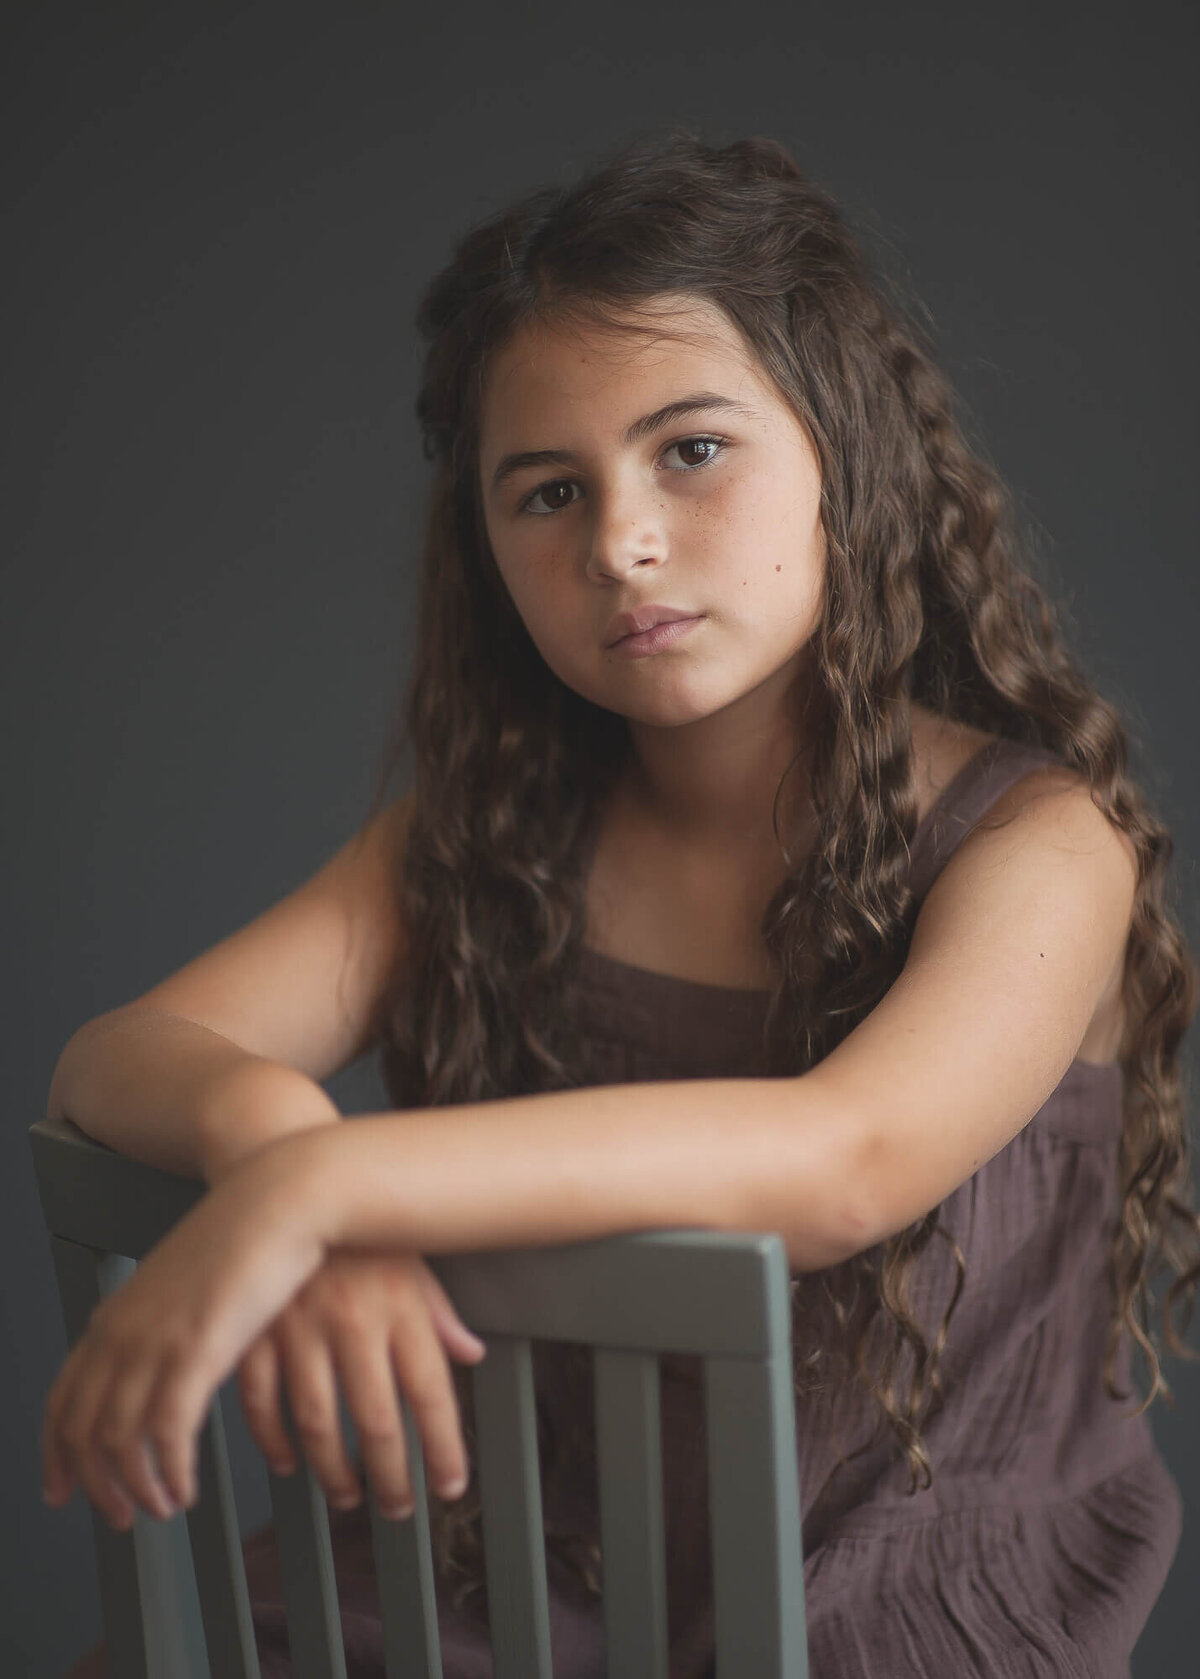 beautiful 9 year old girl with  long  curly hair studio portrait  sitting backwards on a grey chair with a dark grey background, girl is wearing eggplant color